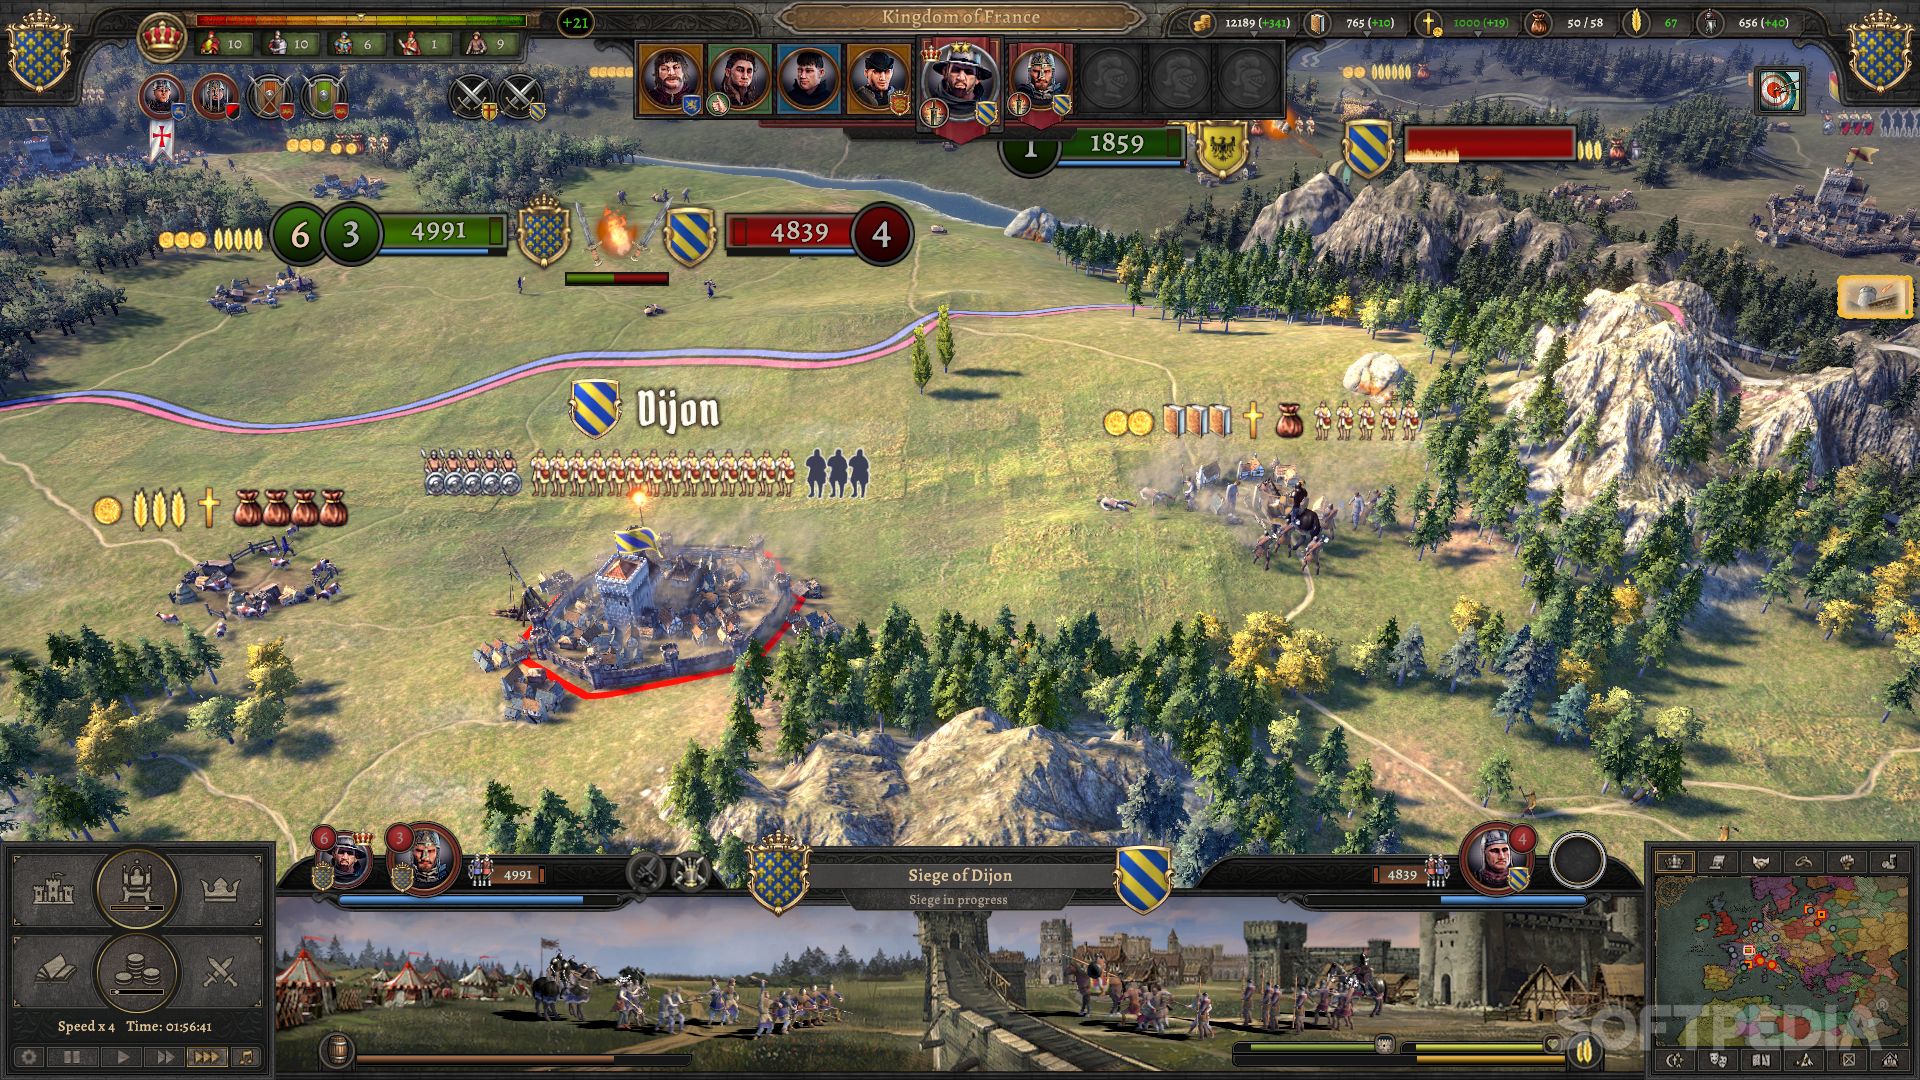 GAME REVIEW  Knights of Honor II: Sovereign 